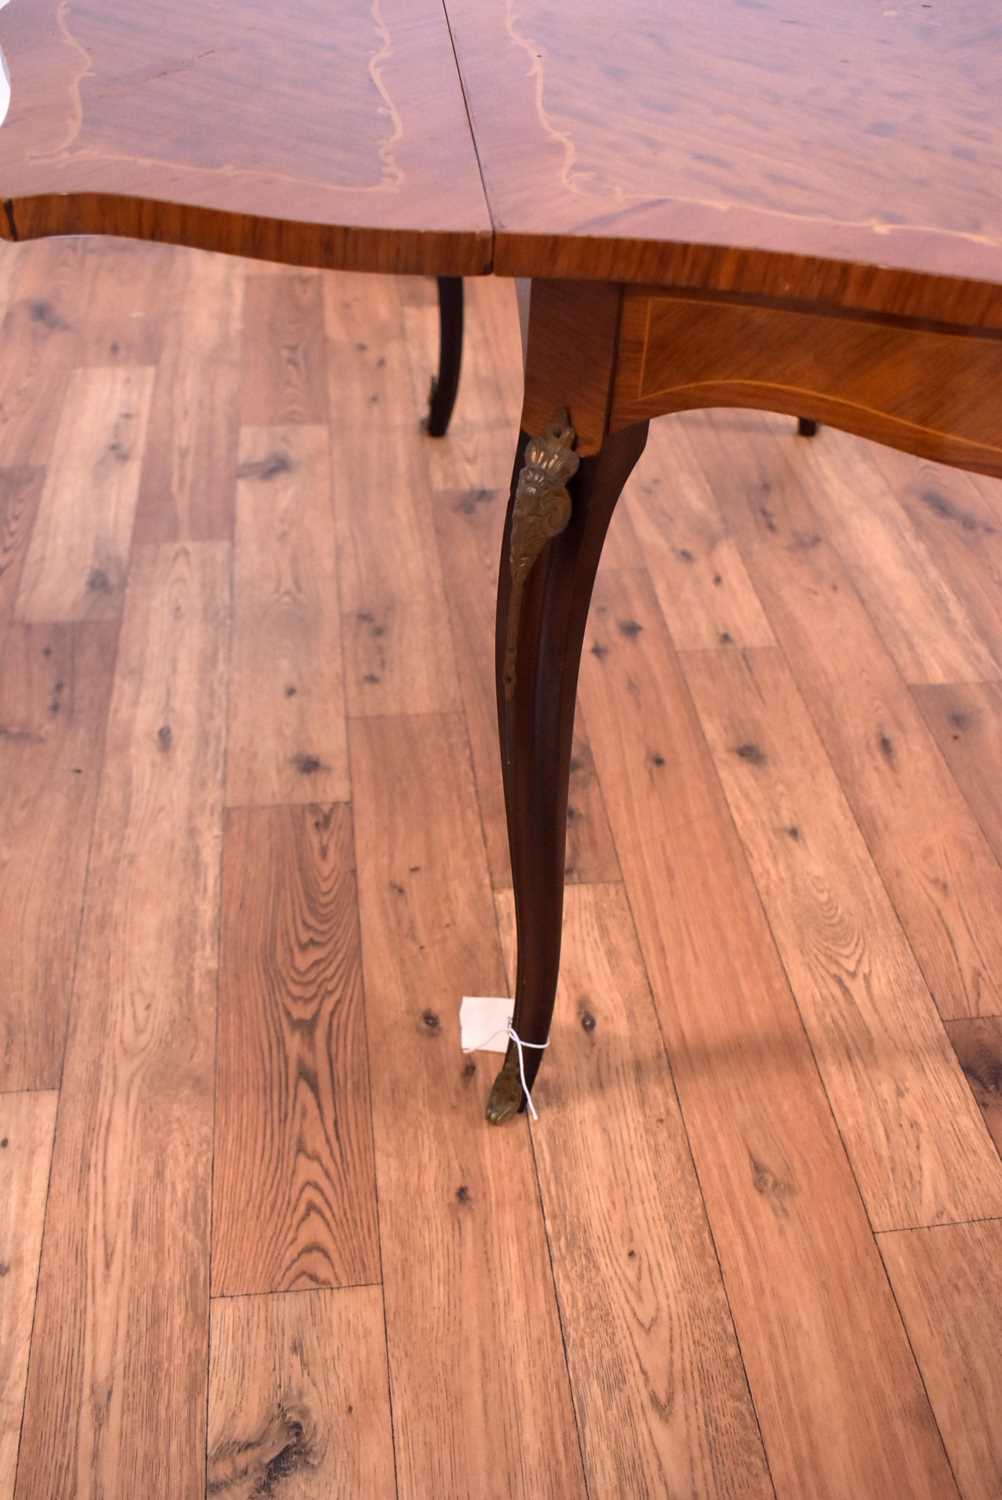 A Regency Revival demi lune inlaid mahogany hall table with a Regency Revival drop leaf table - Image 9 of 9